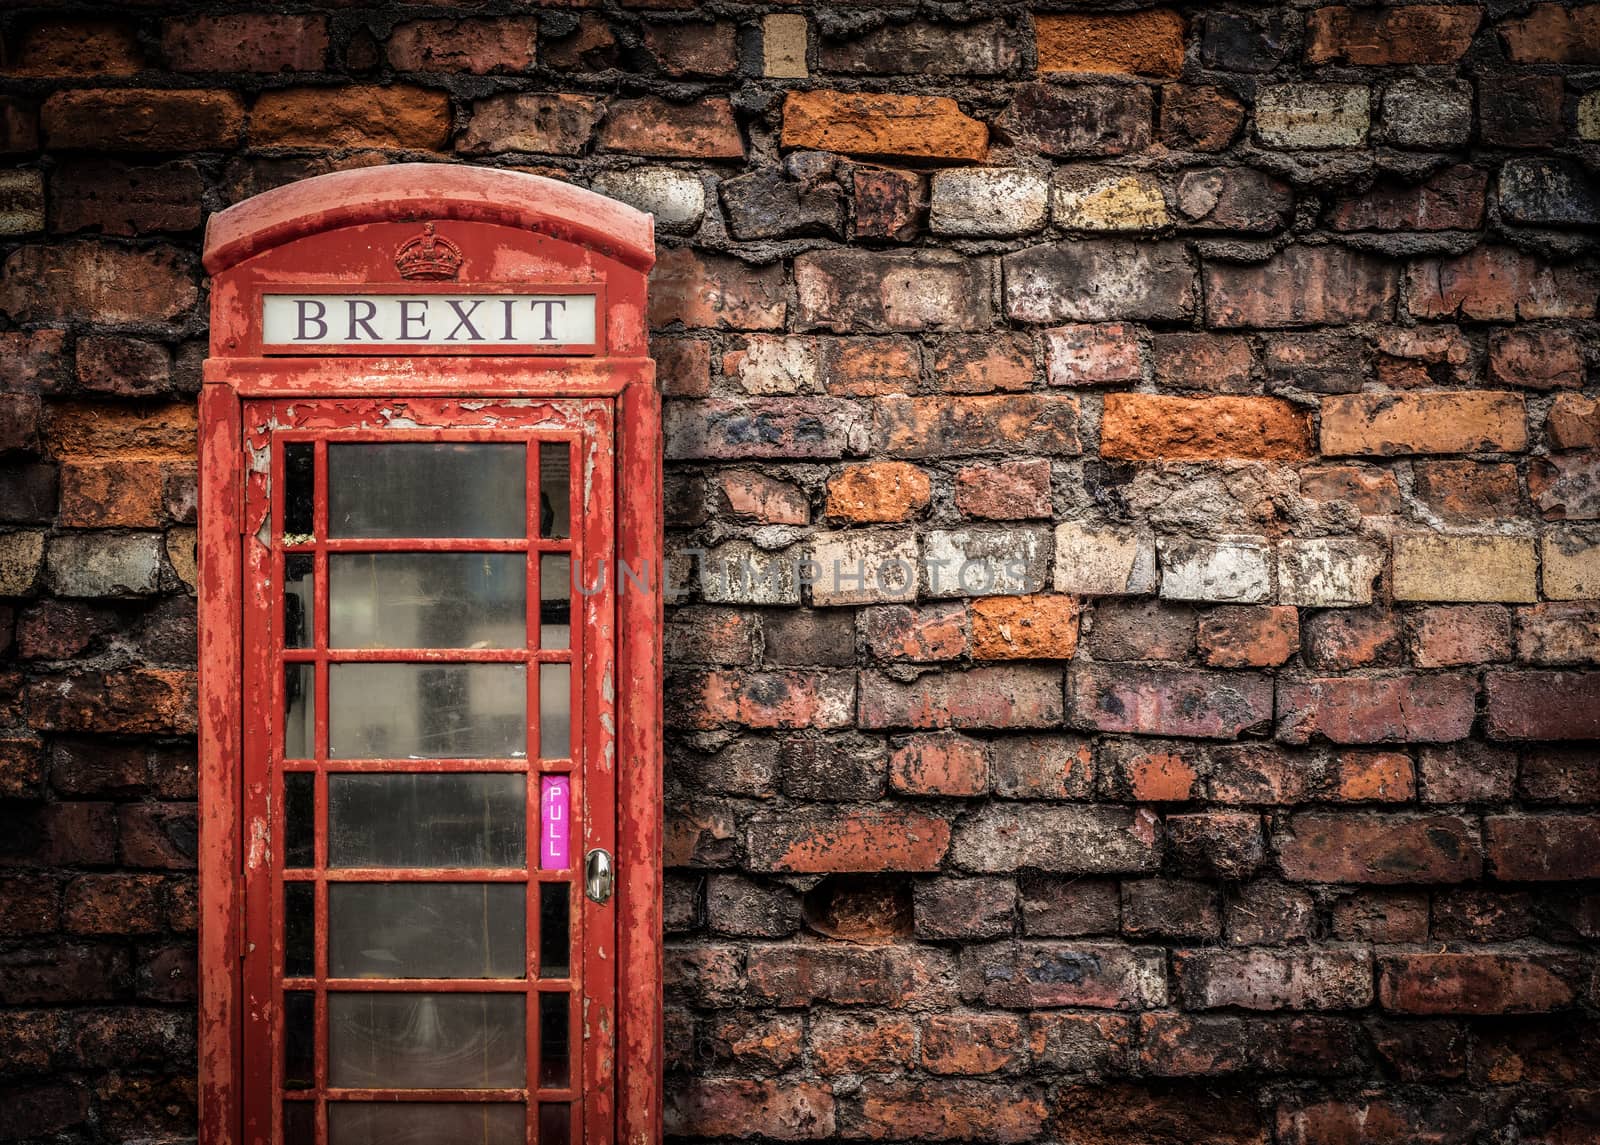 Image Representing Broken Brexit Britain Of An Old Peeling Red Telephone Box Against A Grungy Red Brick Wall With Copy Space